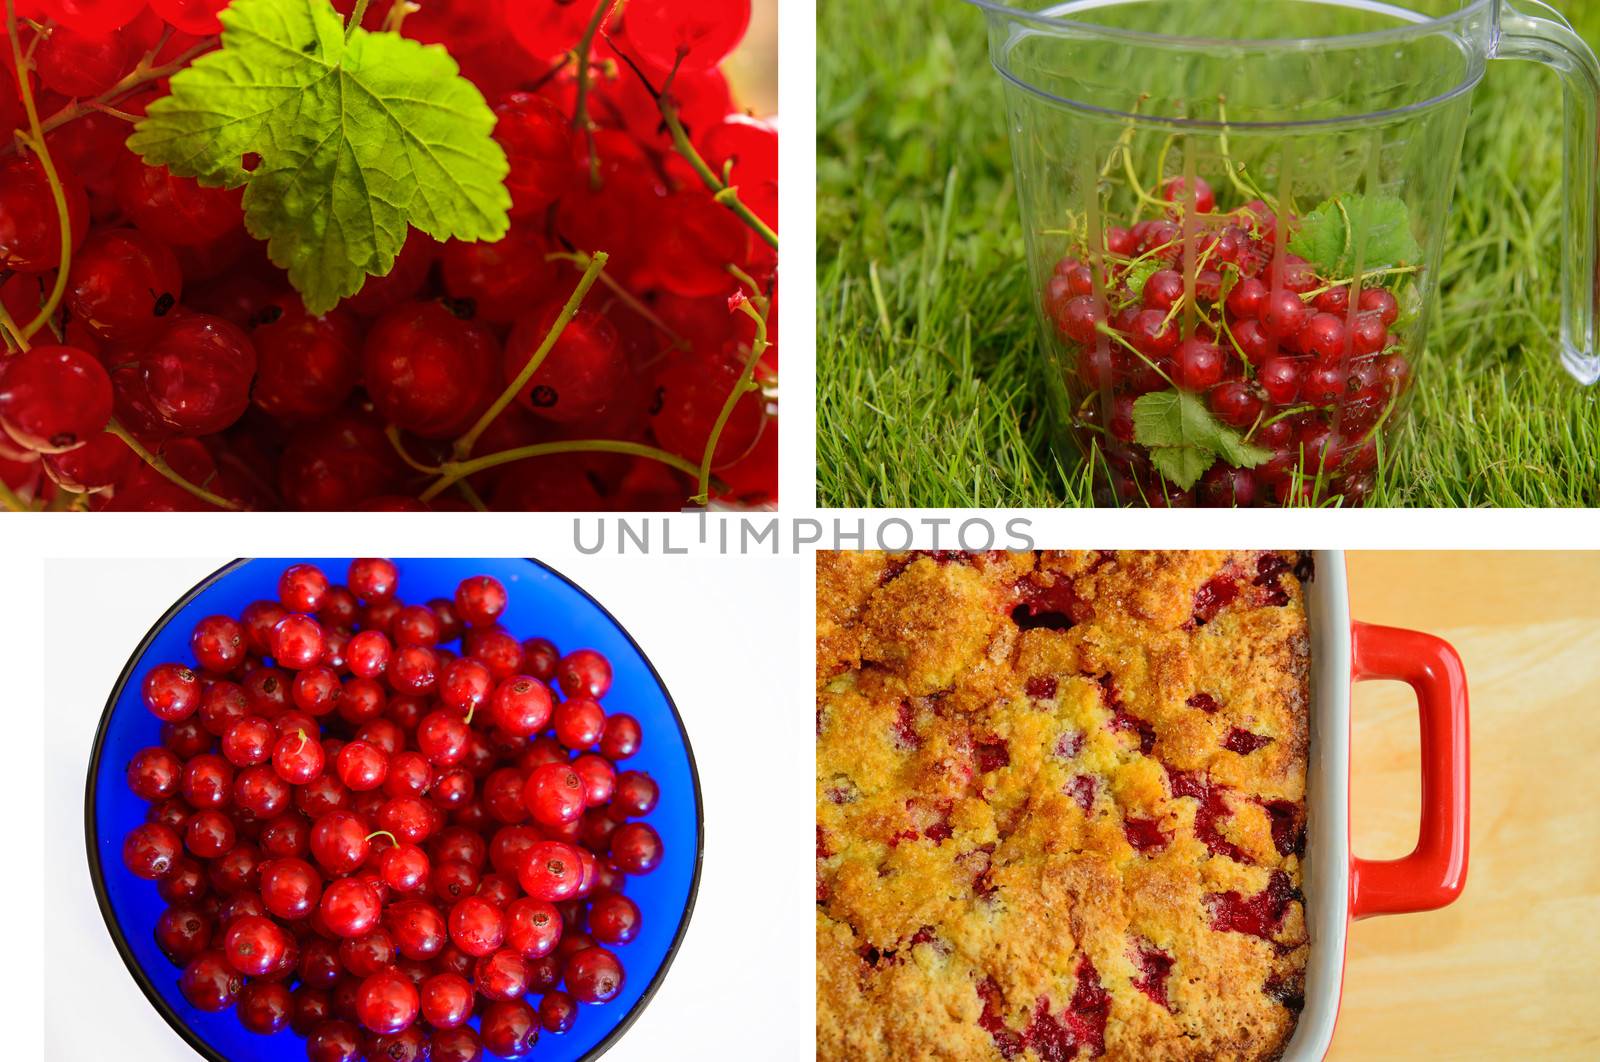 Red currant collage by GryT